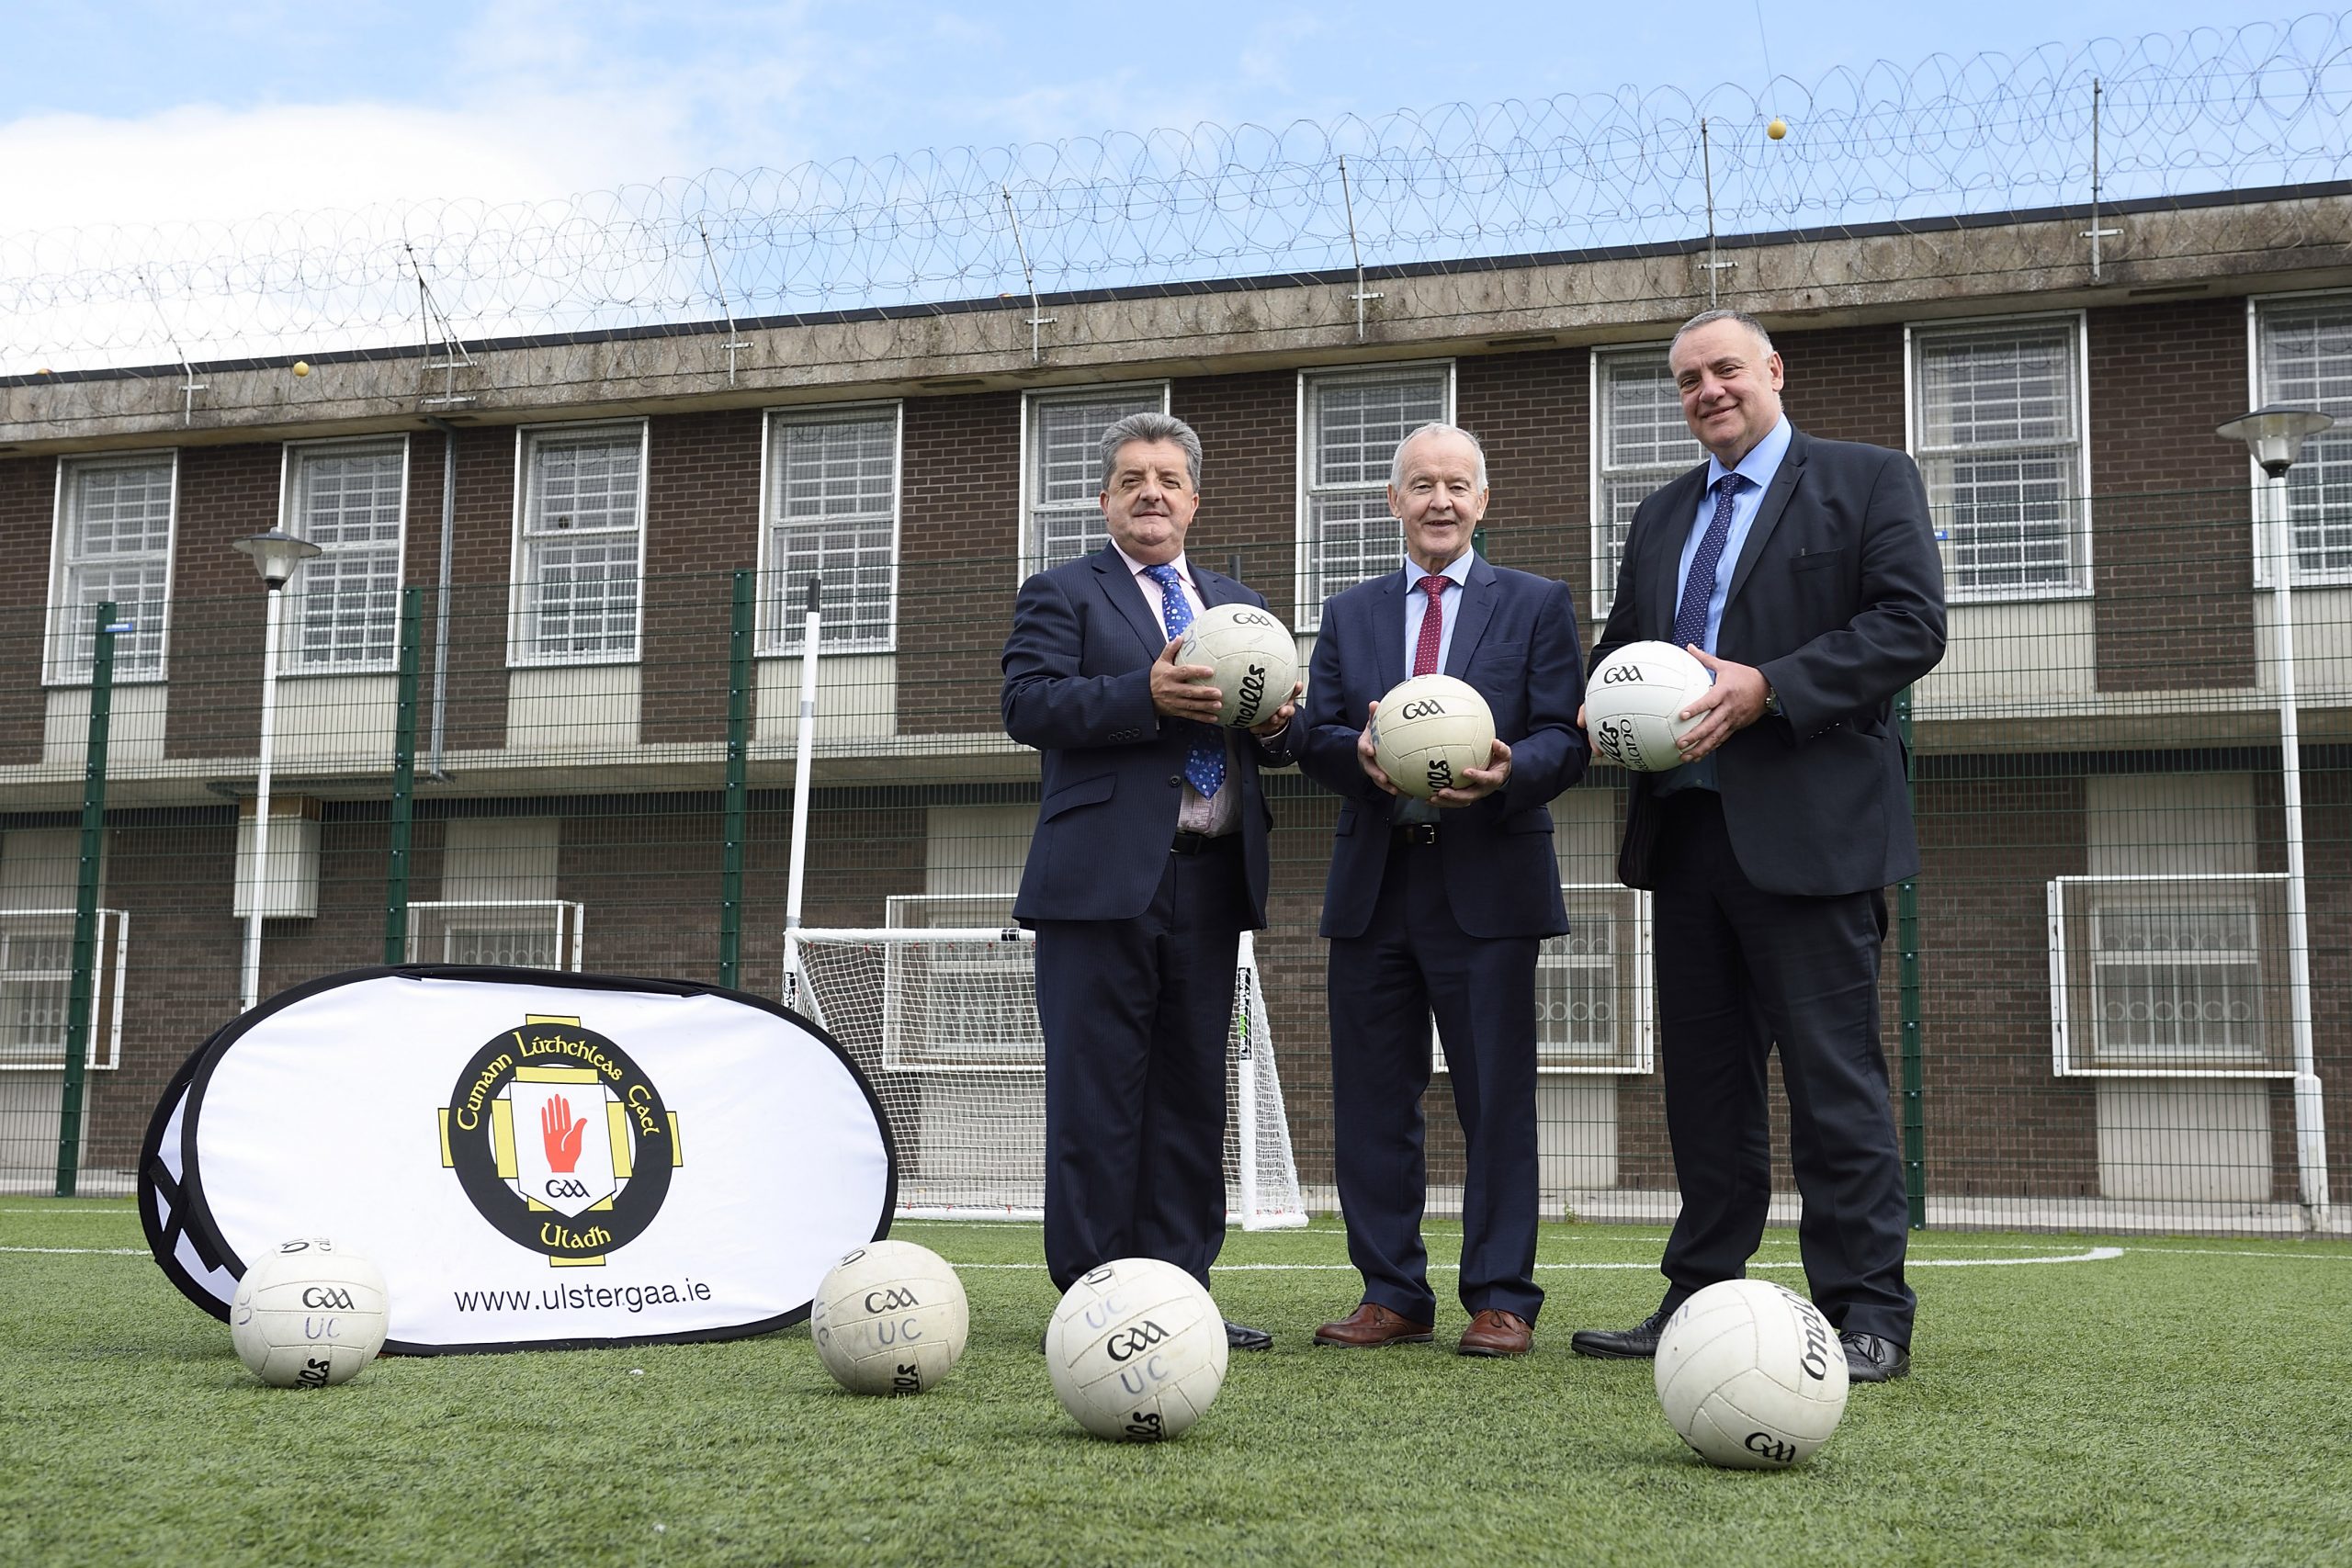 Ulster GAA delivers Prison Service coaching course